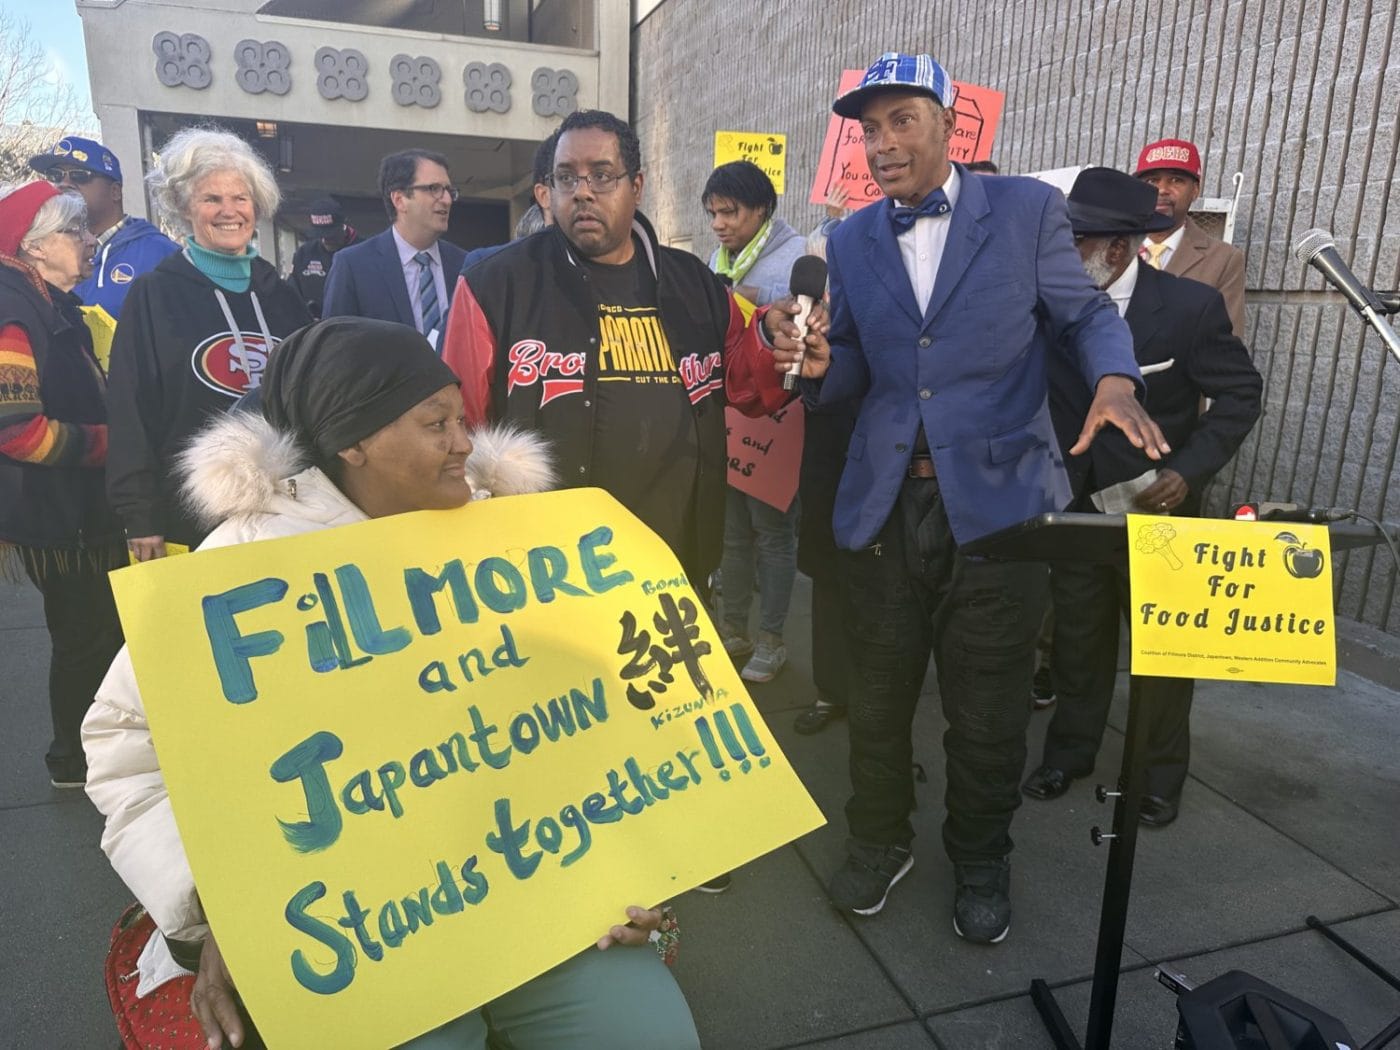 Fillmore-residents-protest-Safeway-closure-012324-by-Kevin-Epps-1400x1050, Fillmore Safeway remains open, Local News & Views 